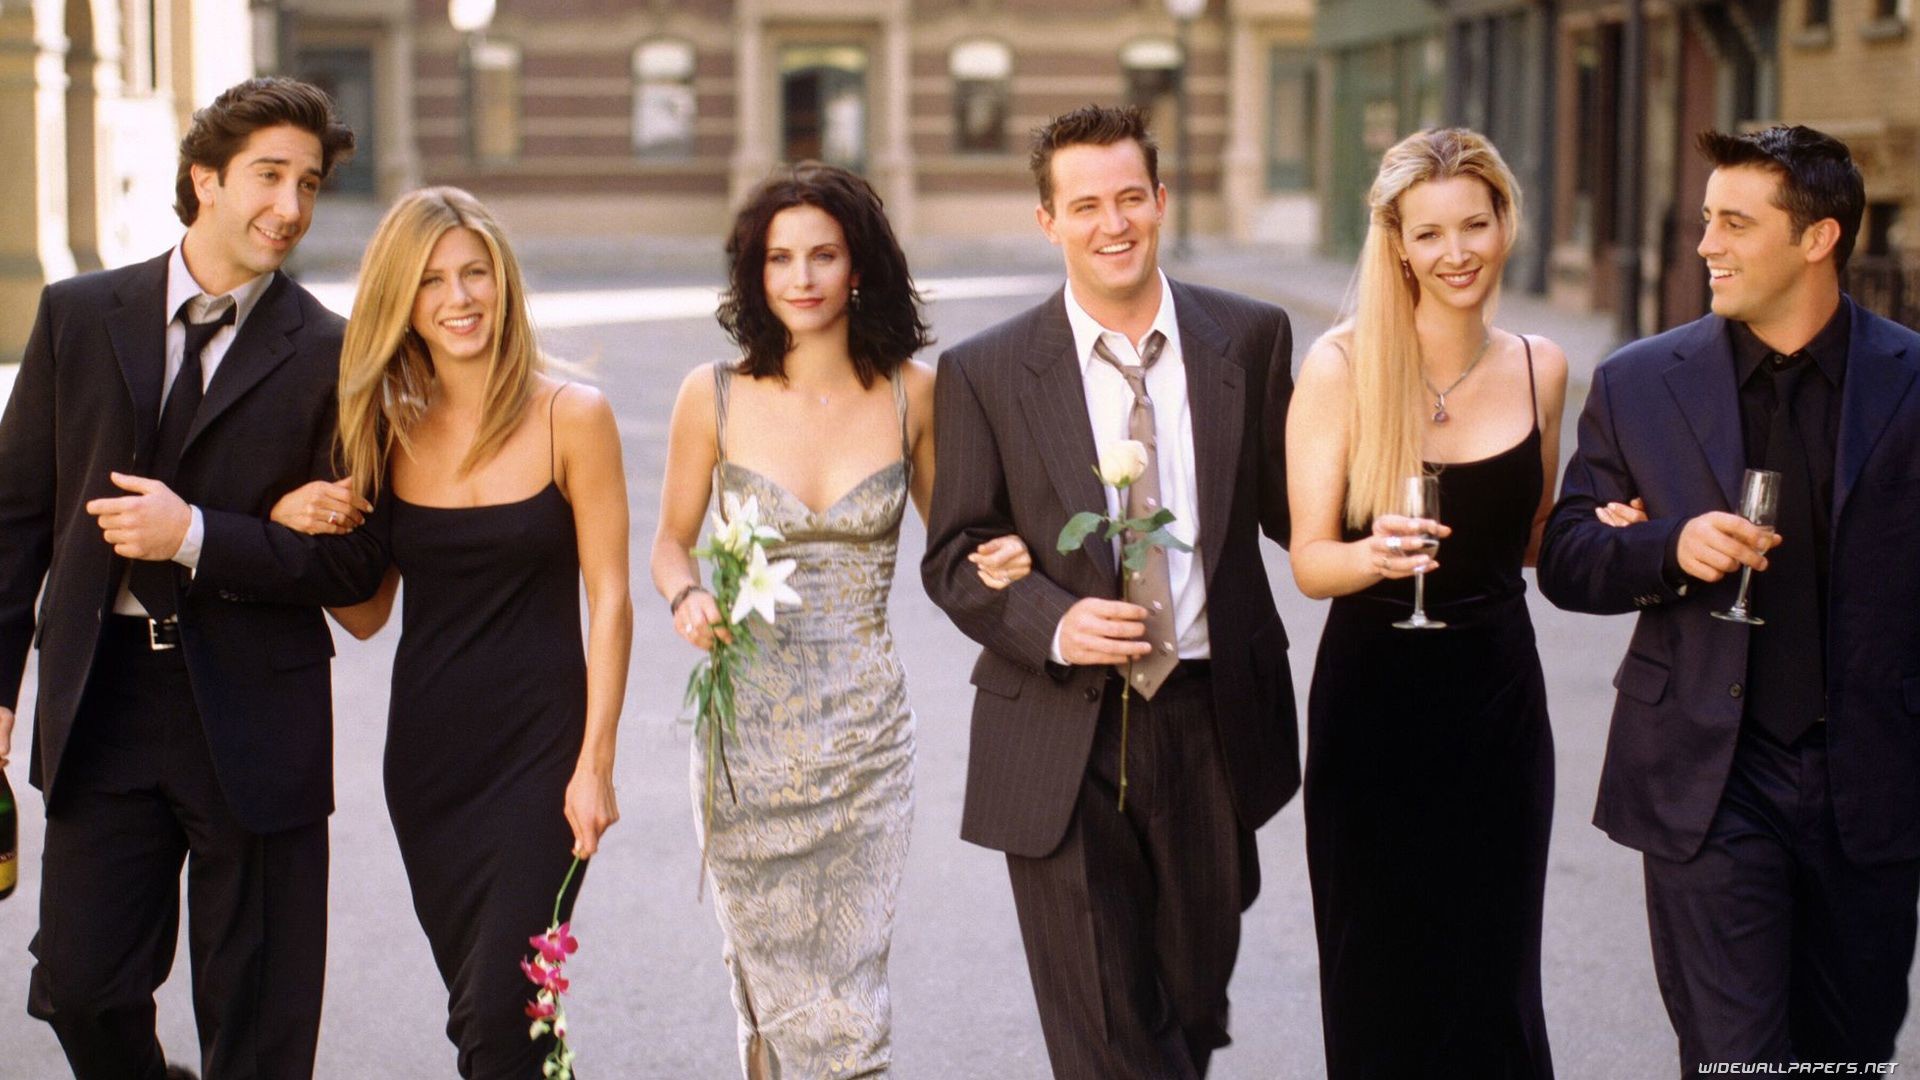 Friends Best TV Sitcom Of all Time